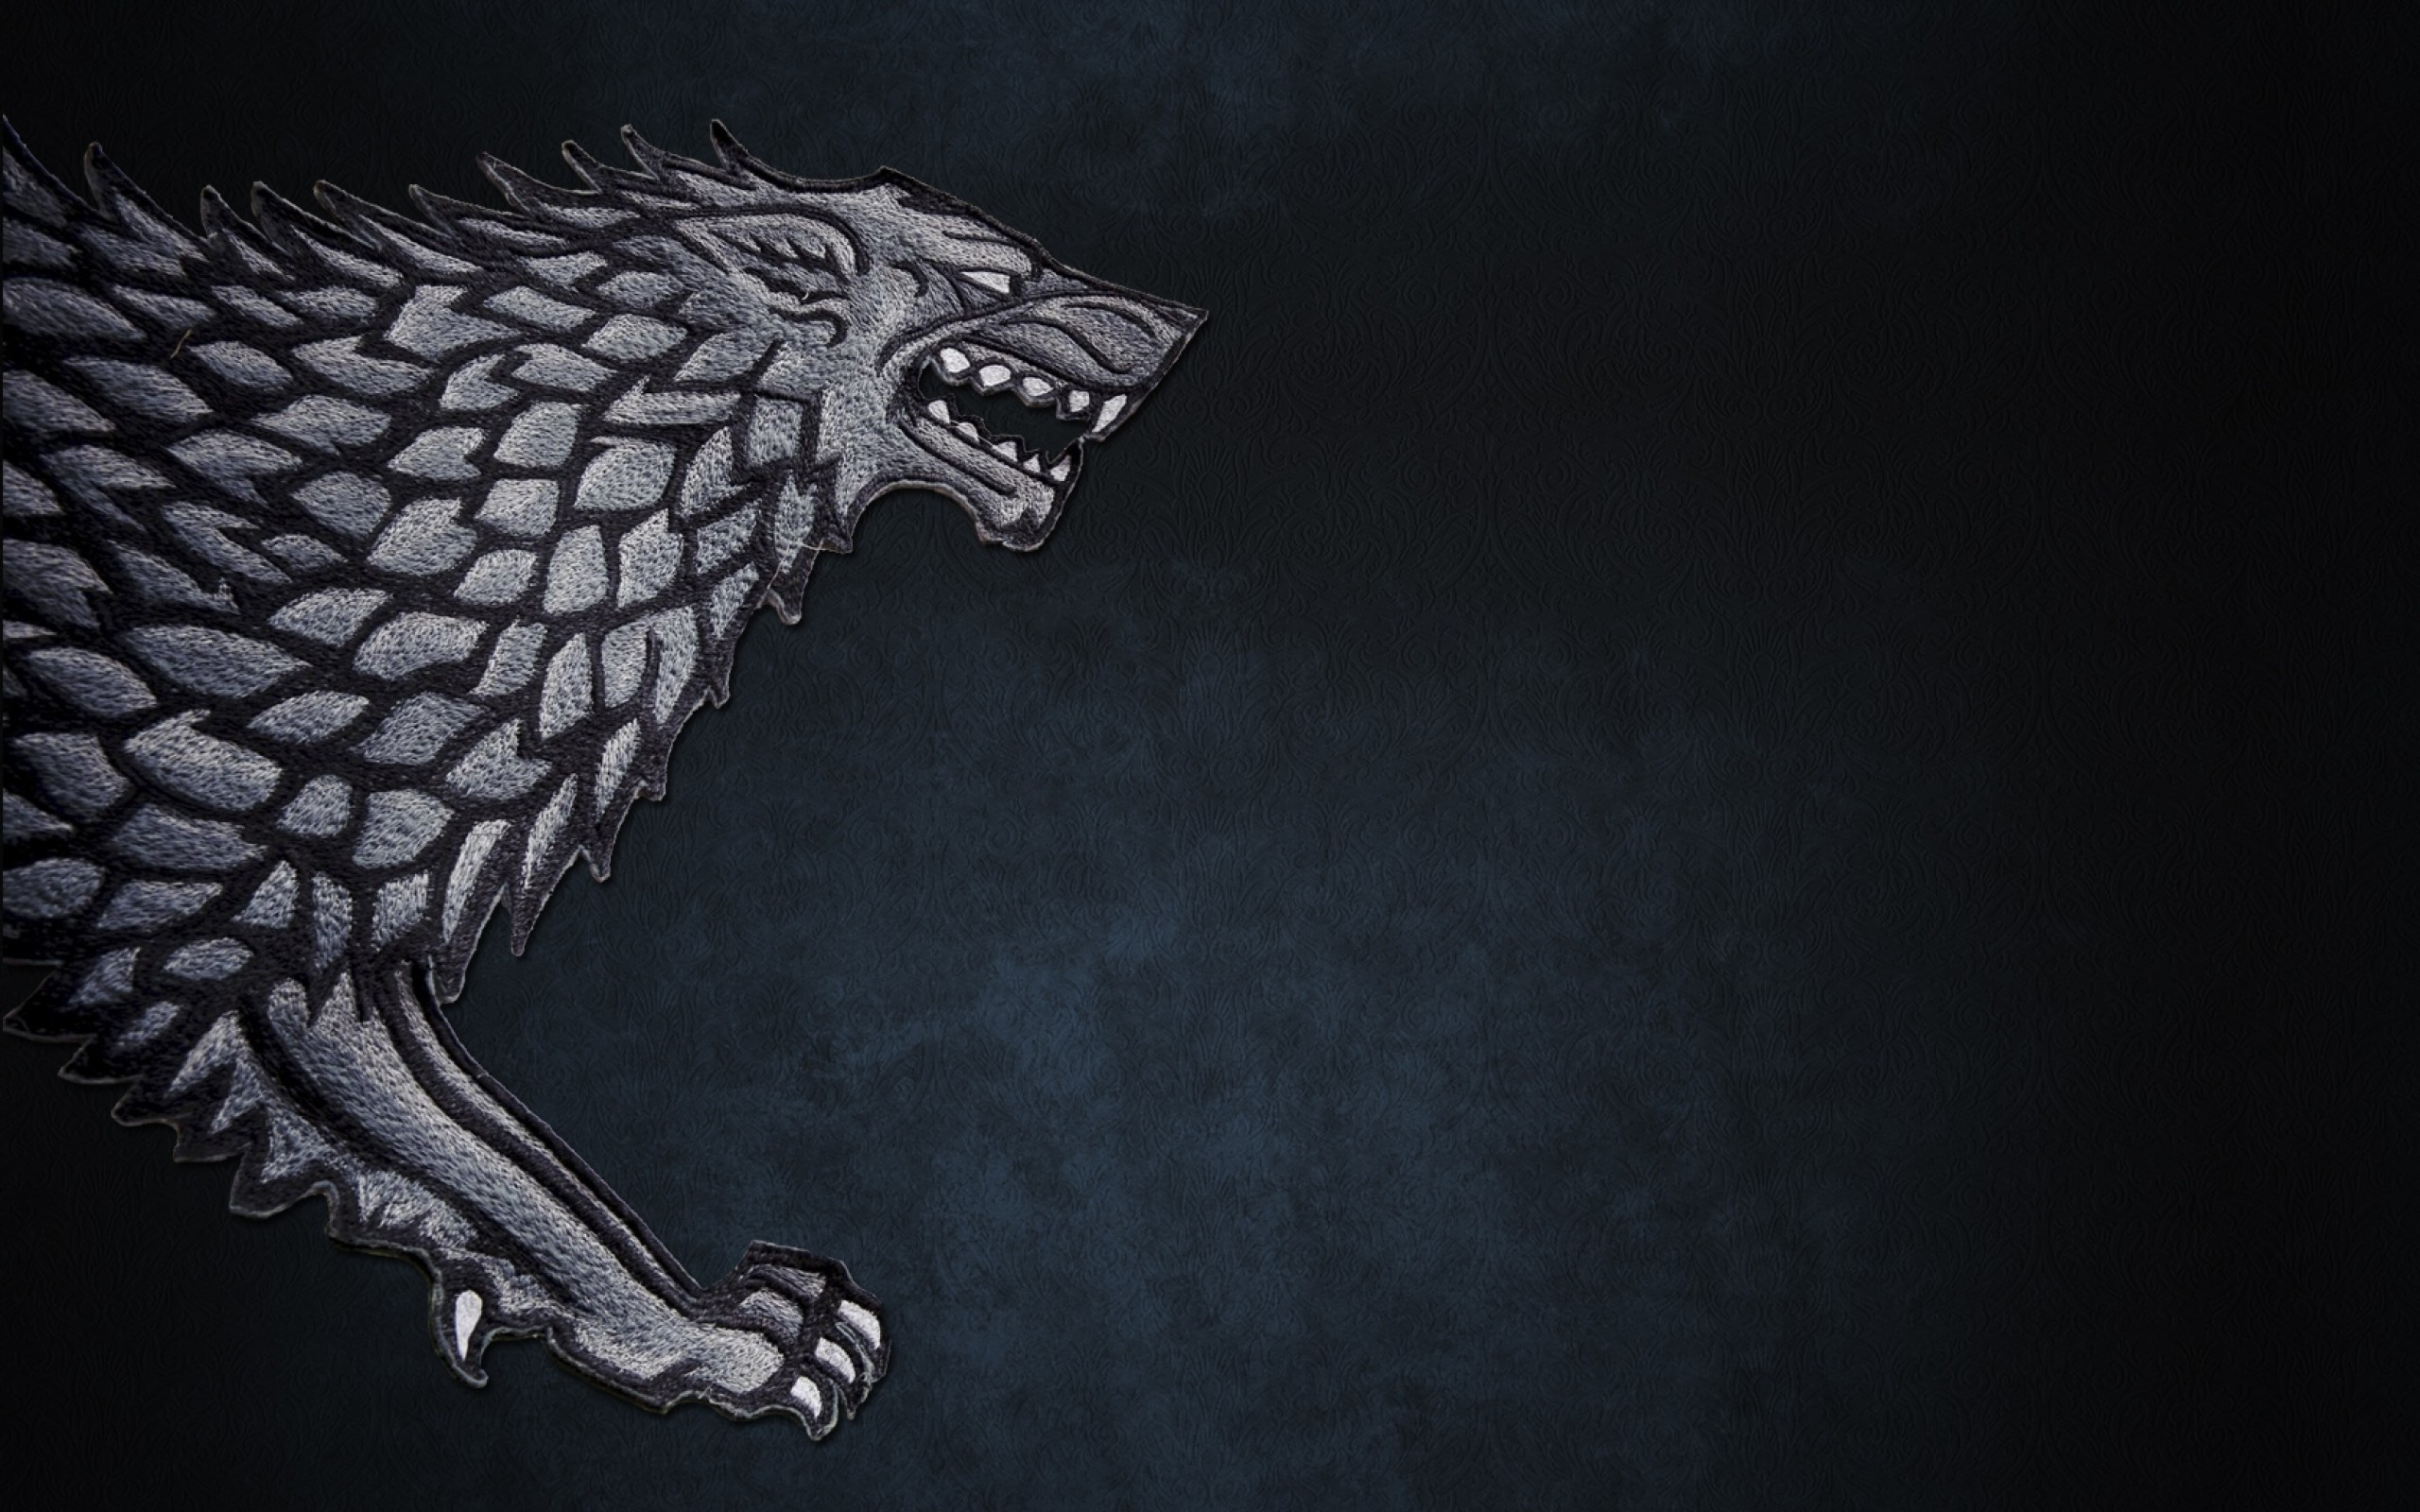 2560x1600 the north remembers wallpaper - photo #11